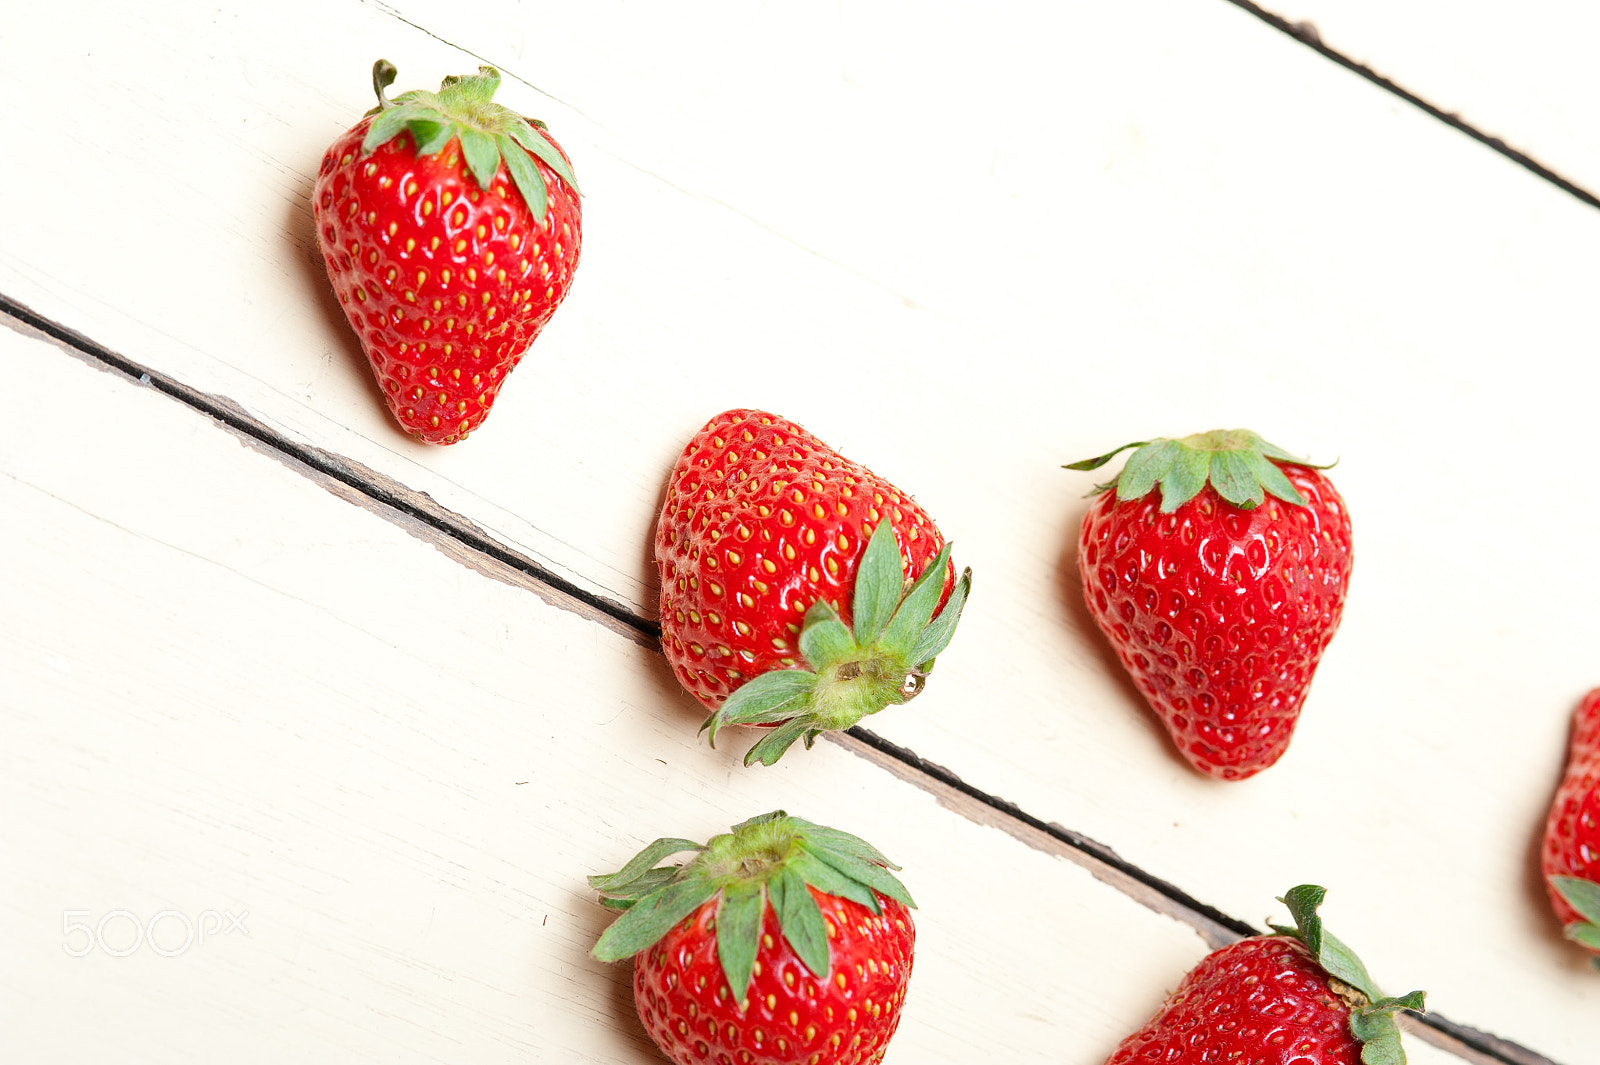 AF Micro-Nikkor 105mm f/2.8 sample photo. Fresh organic strawberry over white wood photography